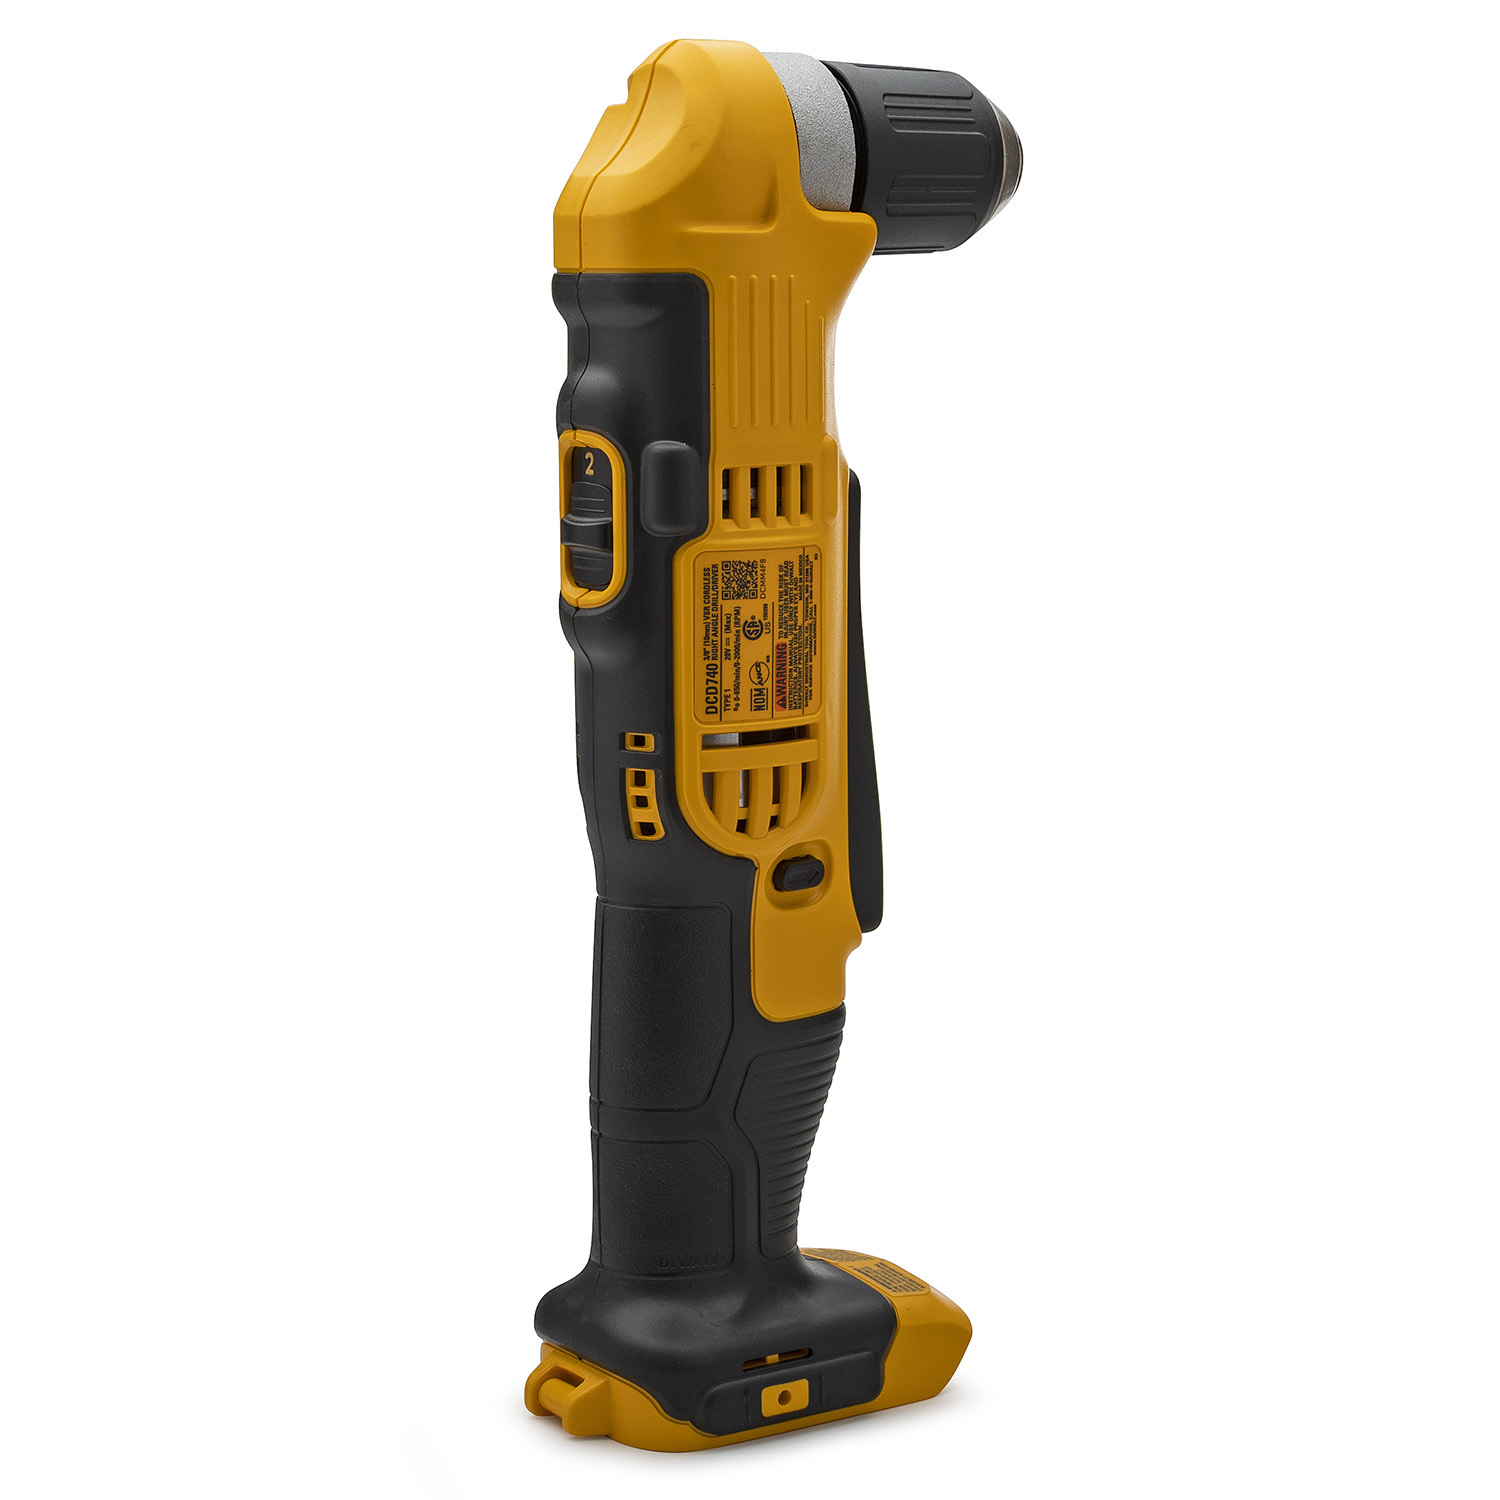 Dewalt 20V MAX Lithium Ion Cordless Right Angle Drill (3/8-Inch) - image 2 of 2